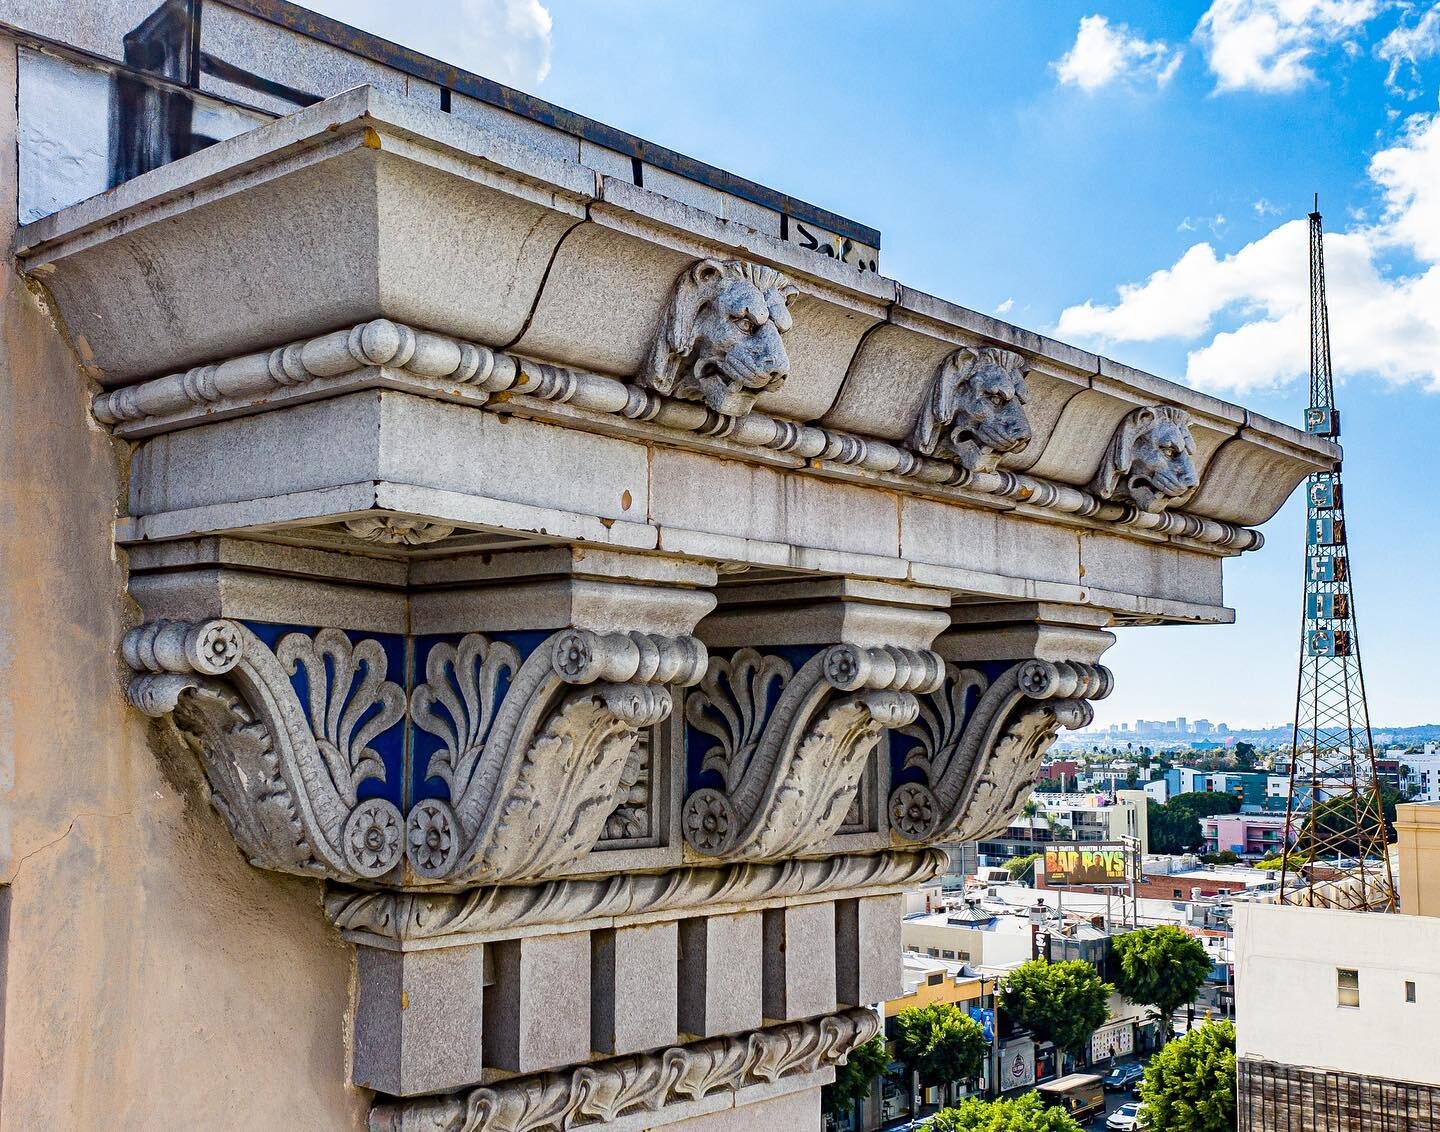 The intricate details are some of our favorite elements of the historic buildings we work on. We are completing the adaptive reuse of this historic bank on Hollywood Blvd and part of the project is to protect and preserve this beautiful facade.